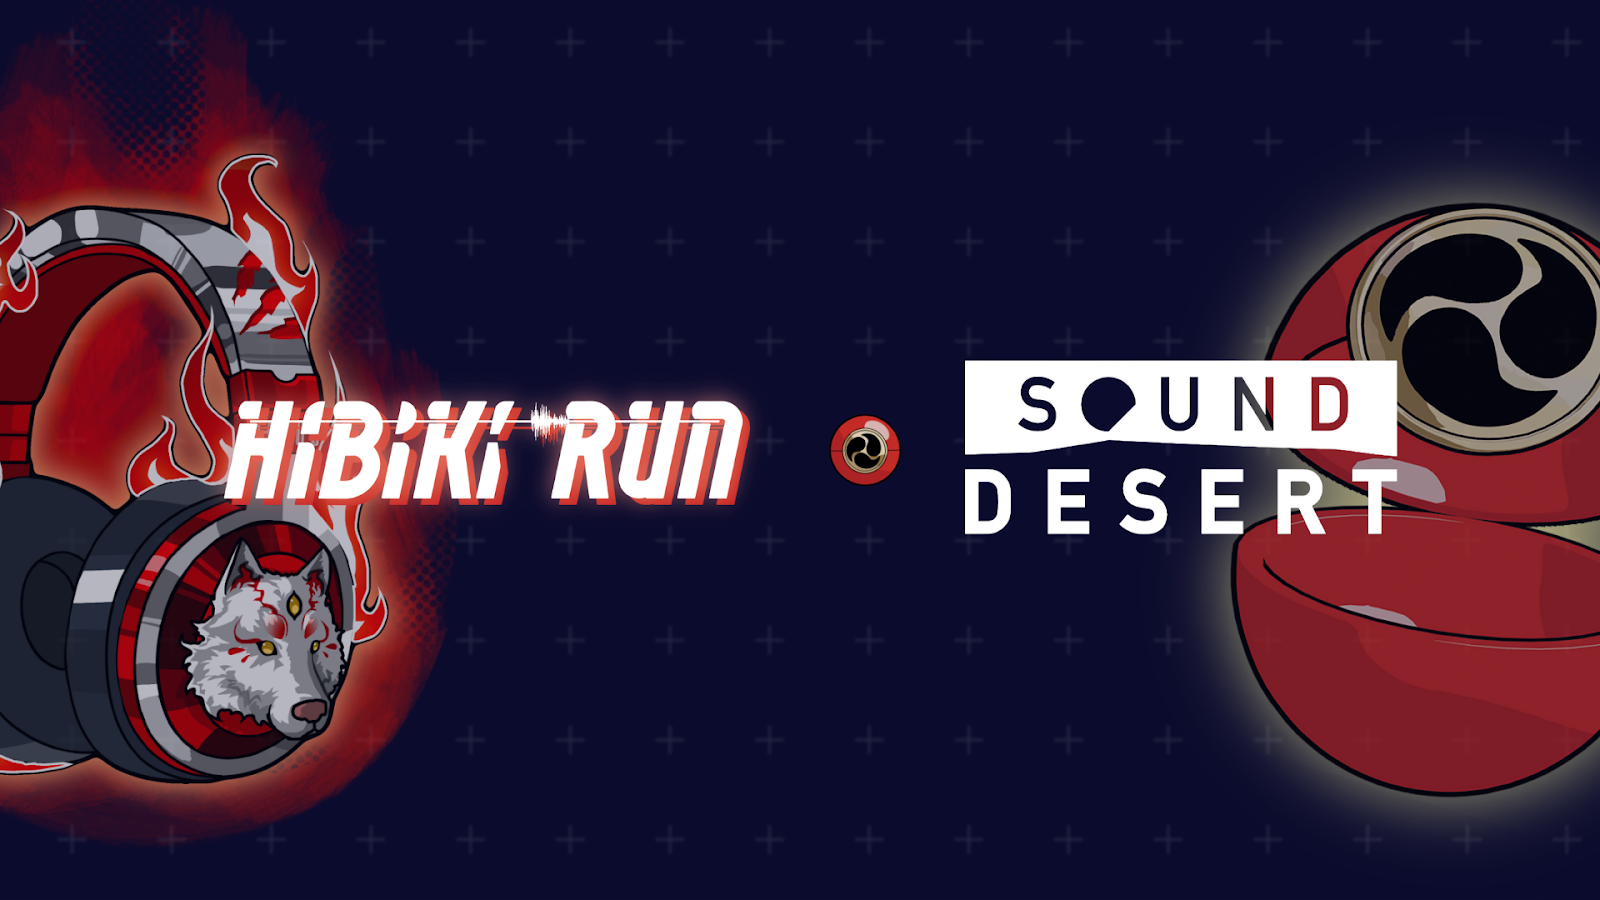 , Hibiki Run and Sound Desert Join Forces to Pioneer the Web3 Music Landscape in Japan